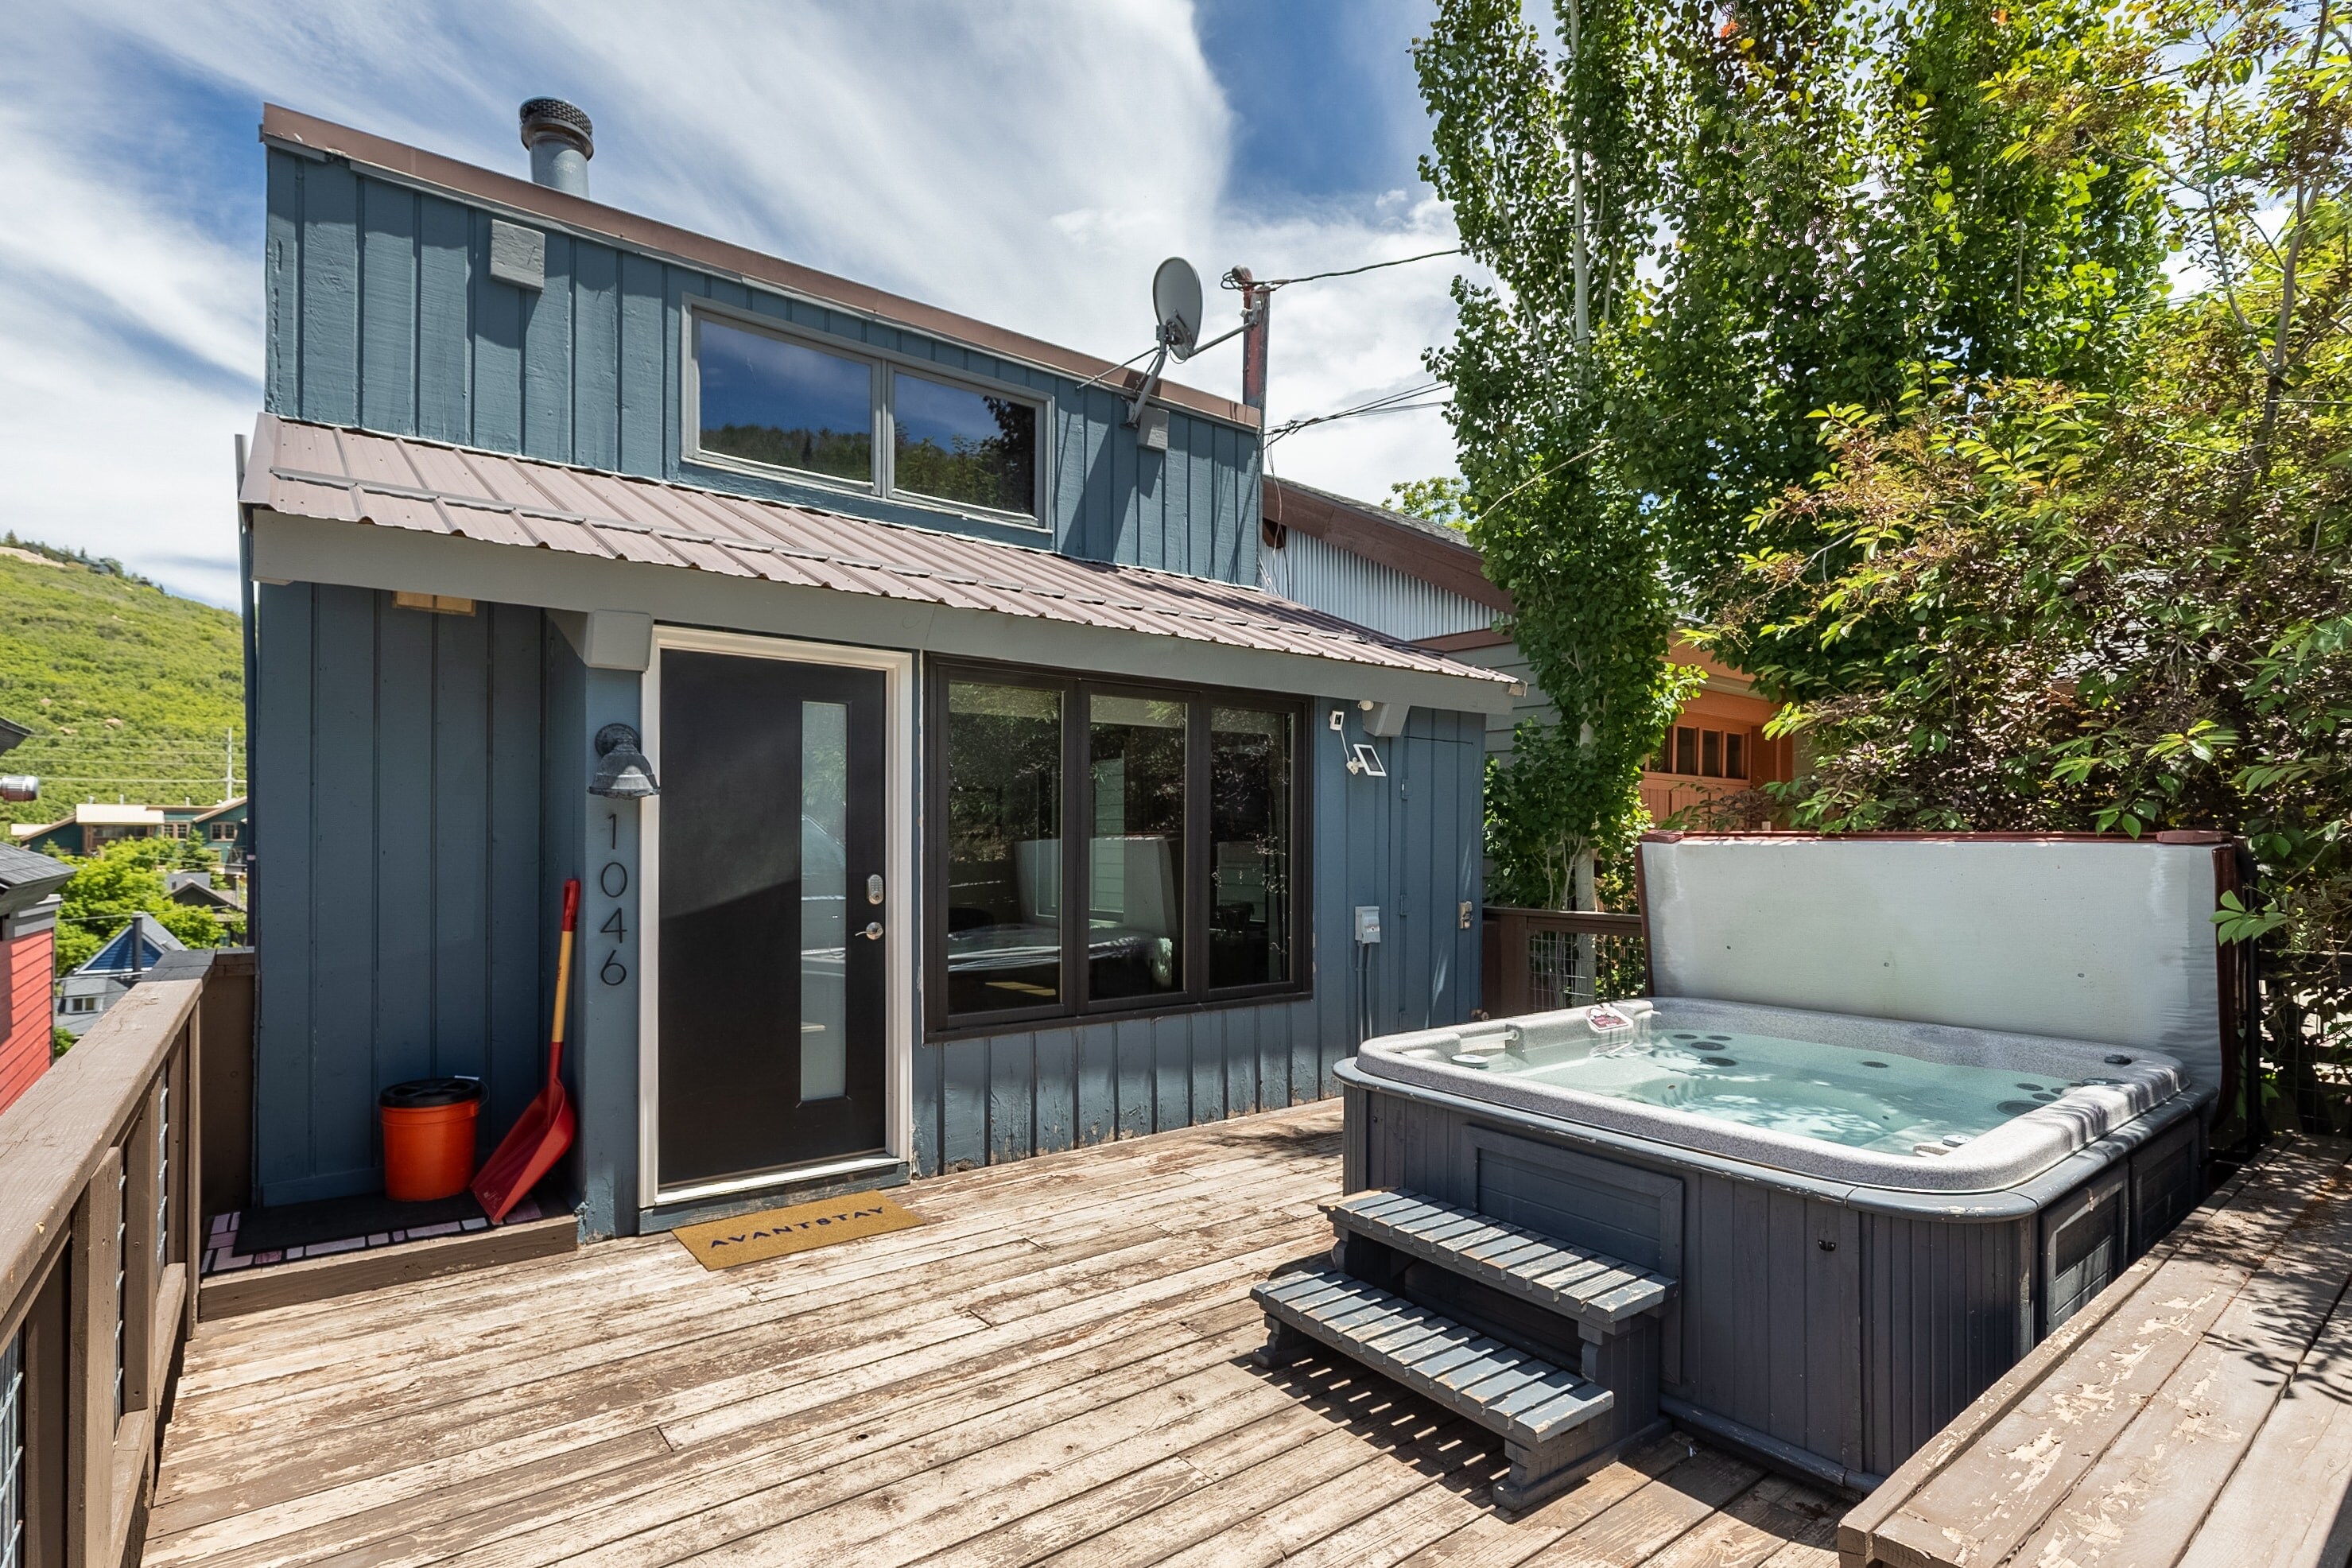 Melt away stress and tension in this hot tub.